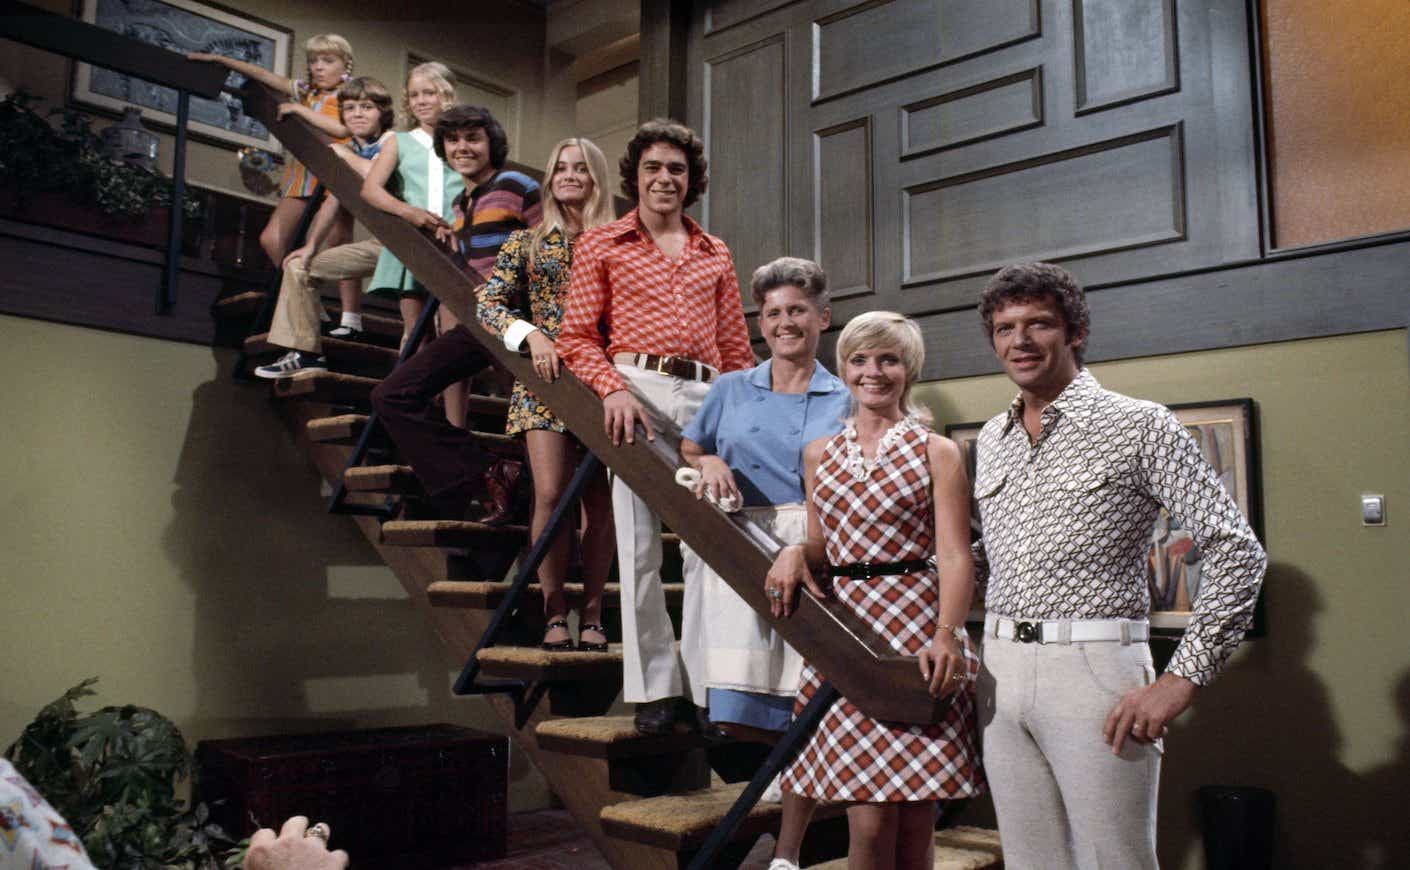 the cast of the brady bunch standing on a staircase in the family home